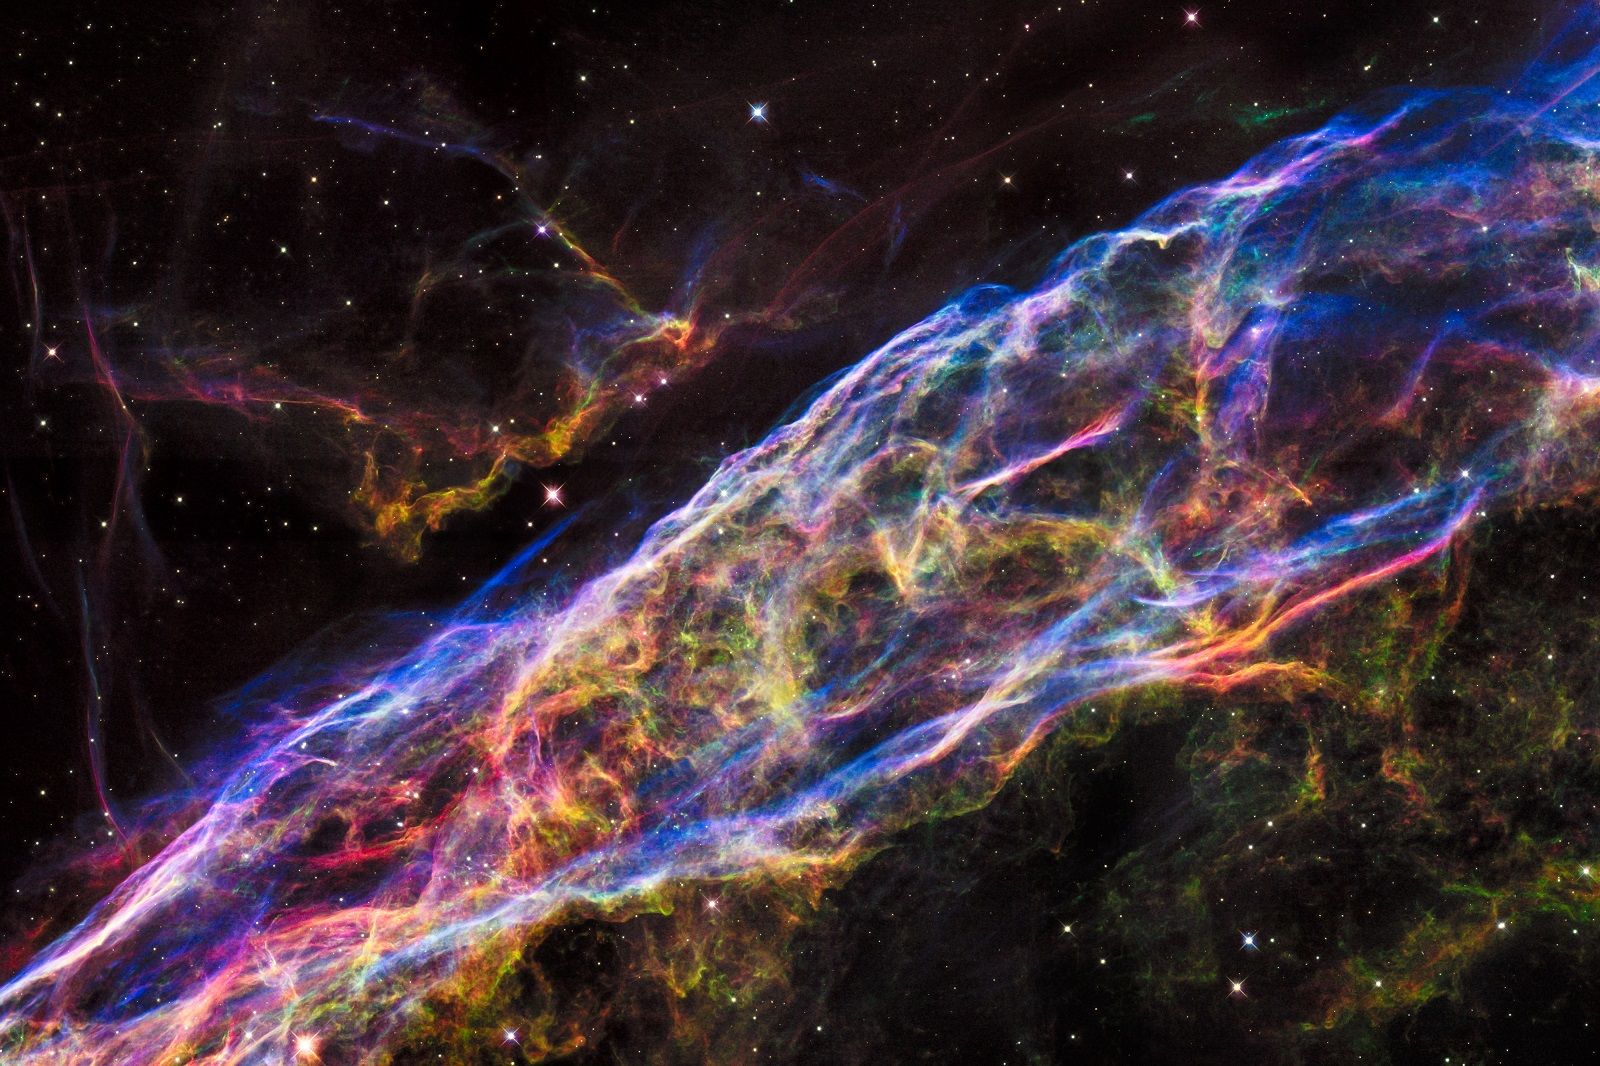 Astounding Images From The Depths Of The Universe Courtesy Of The Hubble Space Telescope image 1